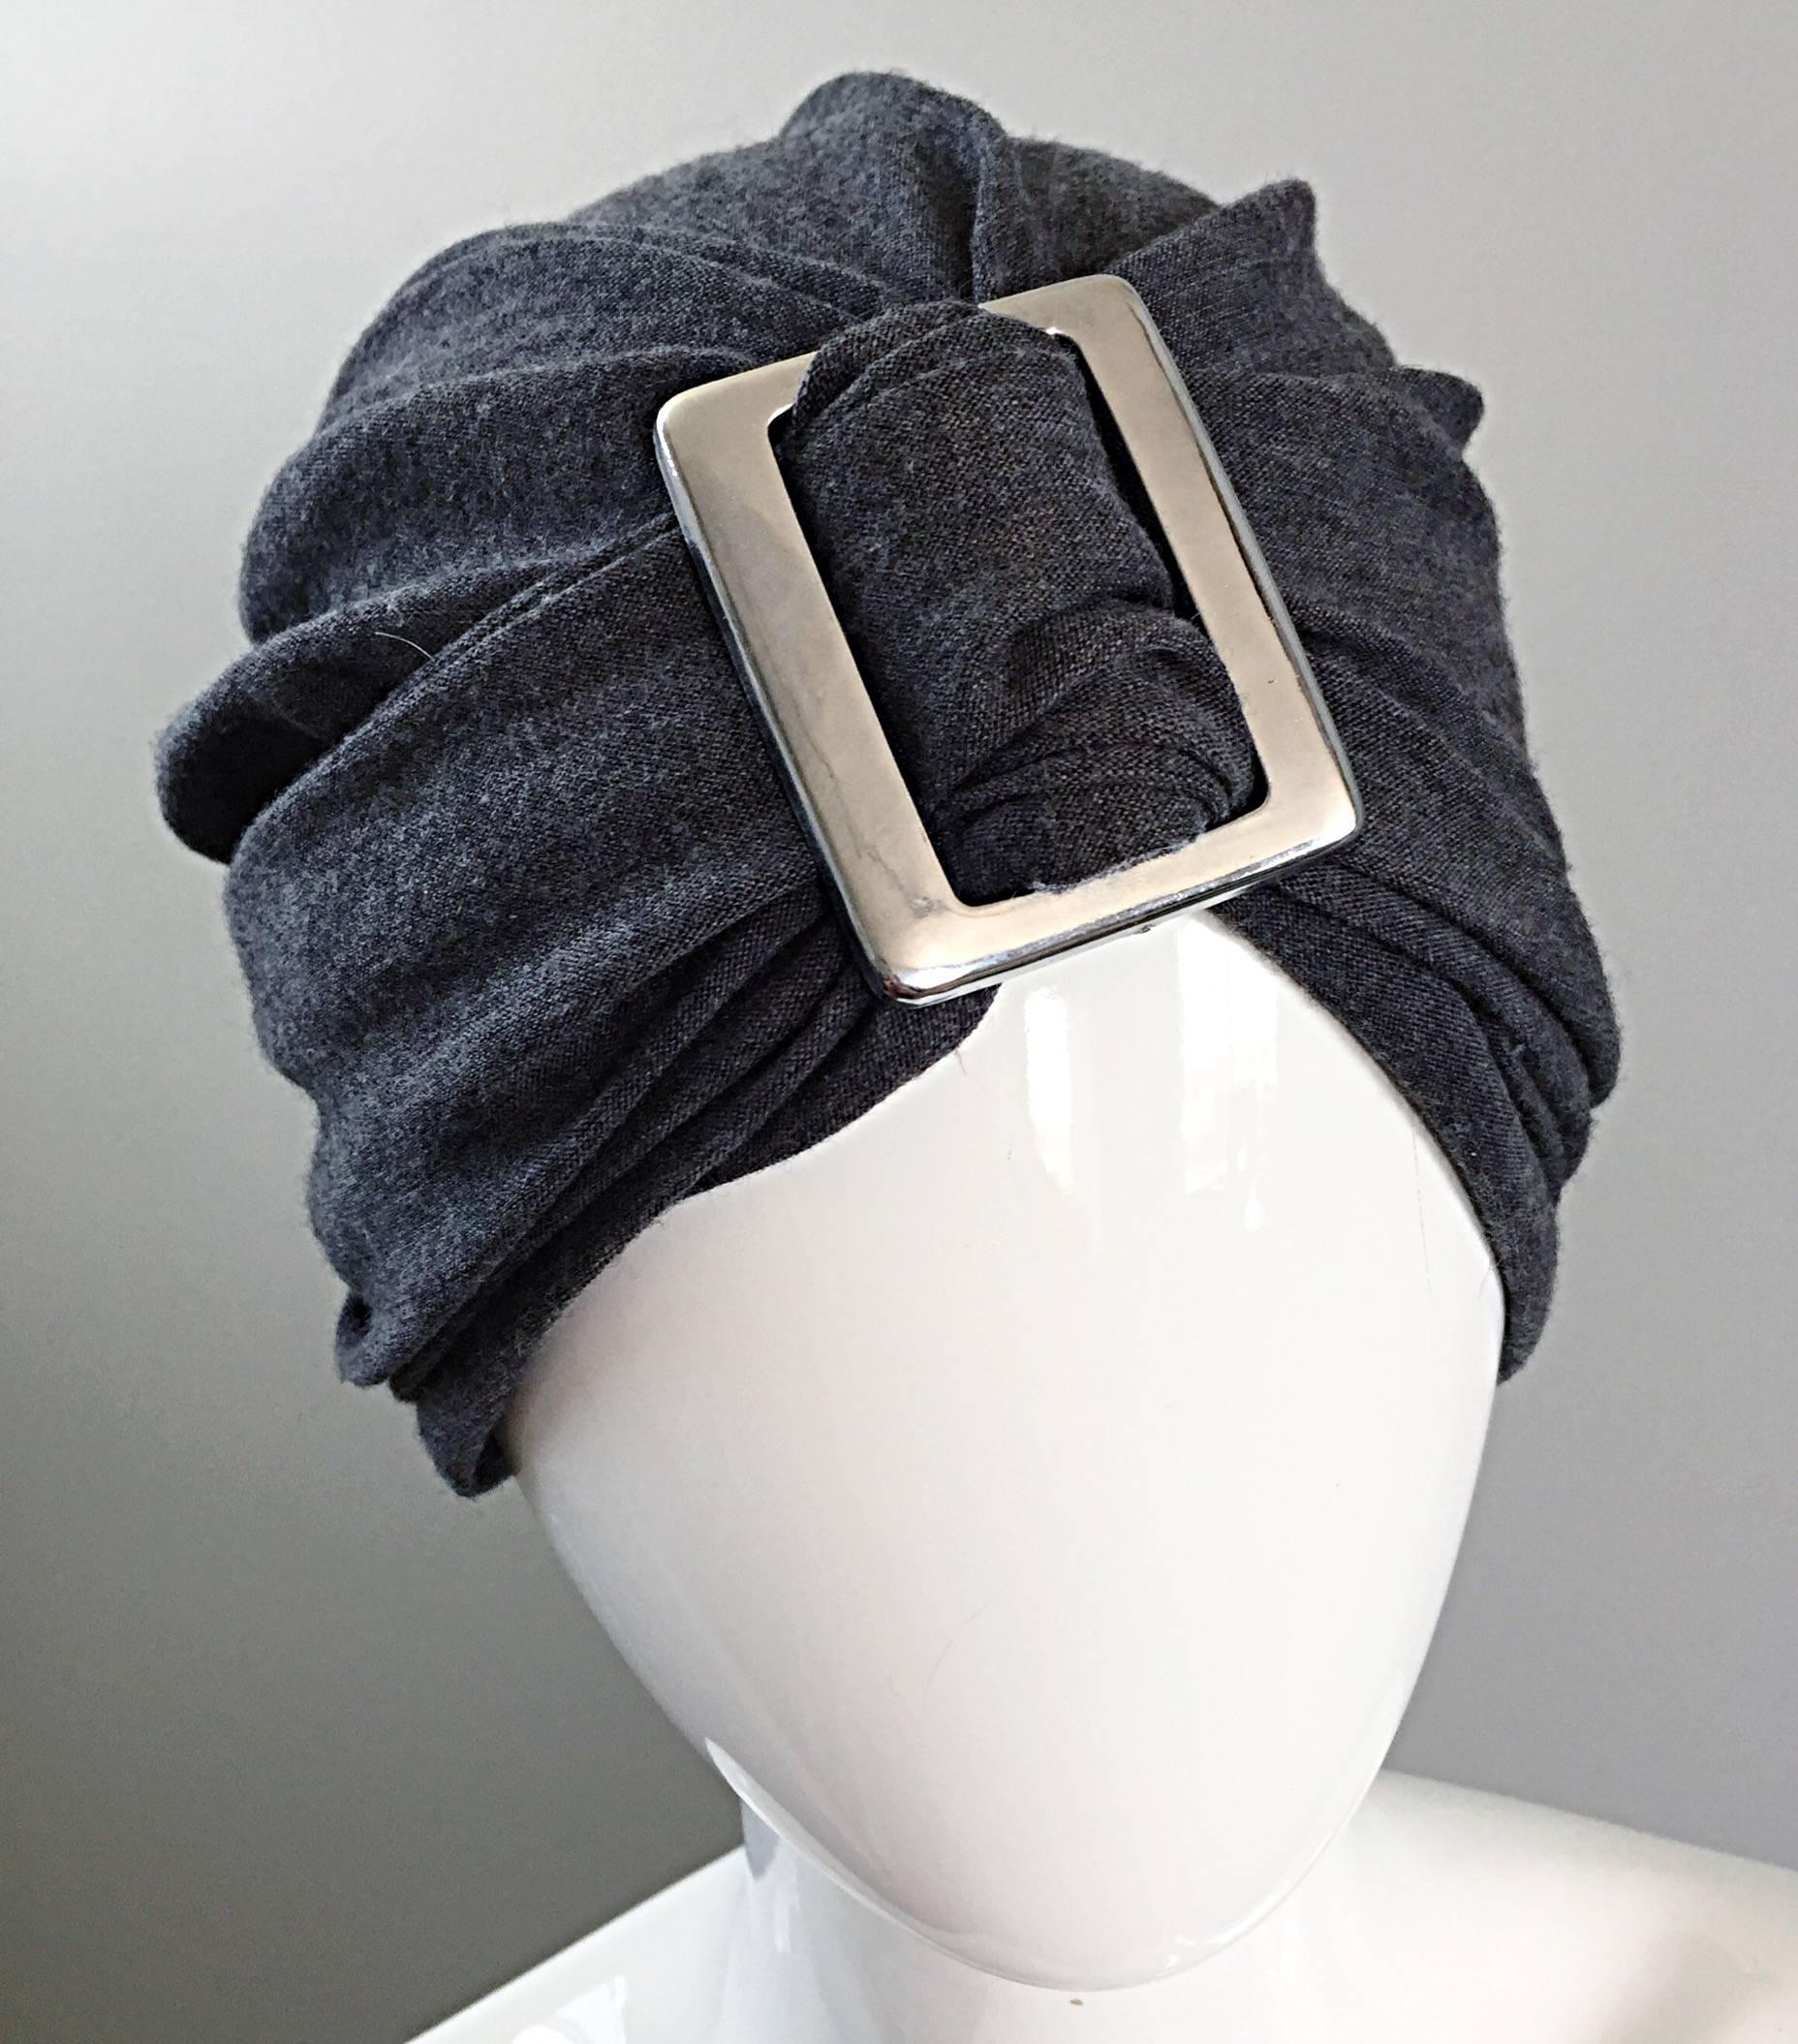 Awesome vintage 1960s CHRISTIAN DIOR for SAKS FIFTH AVENUE charcoal gray soft wool turban hat, with oversized silver metal buckle! Intricate pleating detail throughout. Stretches to fit any size head (Small - Large). Super versatile. Great with